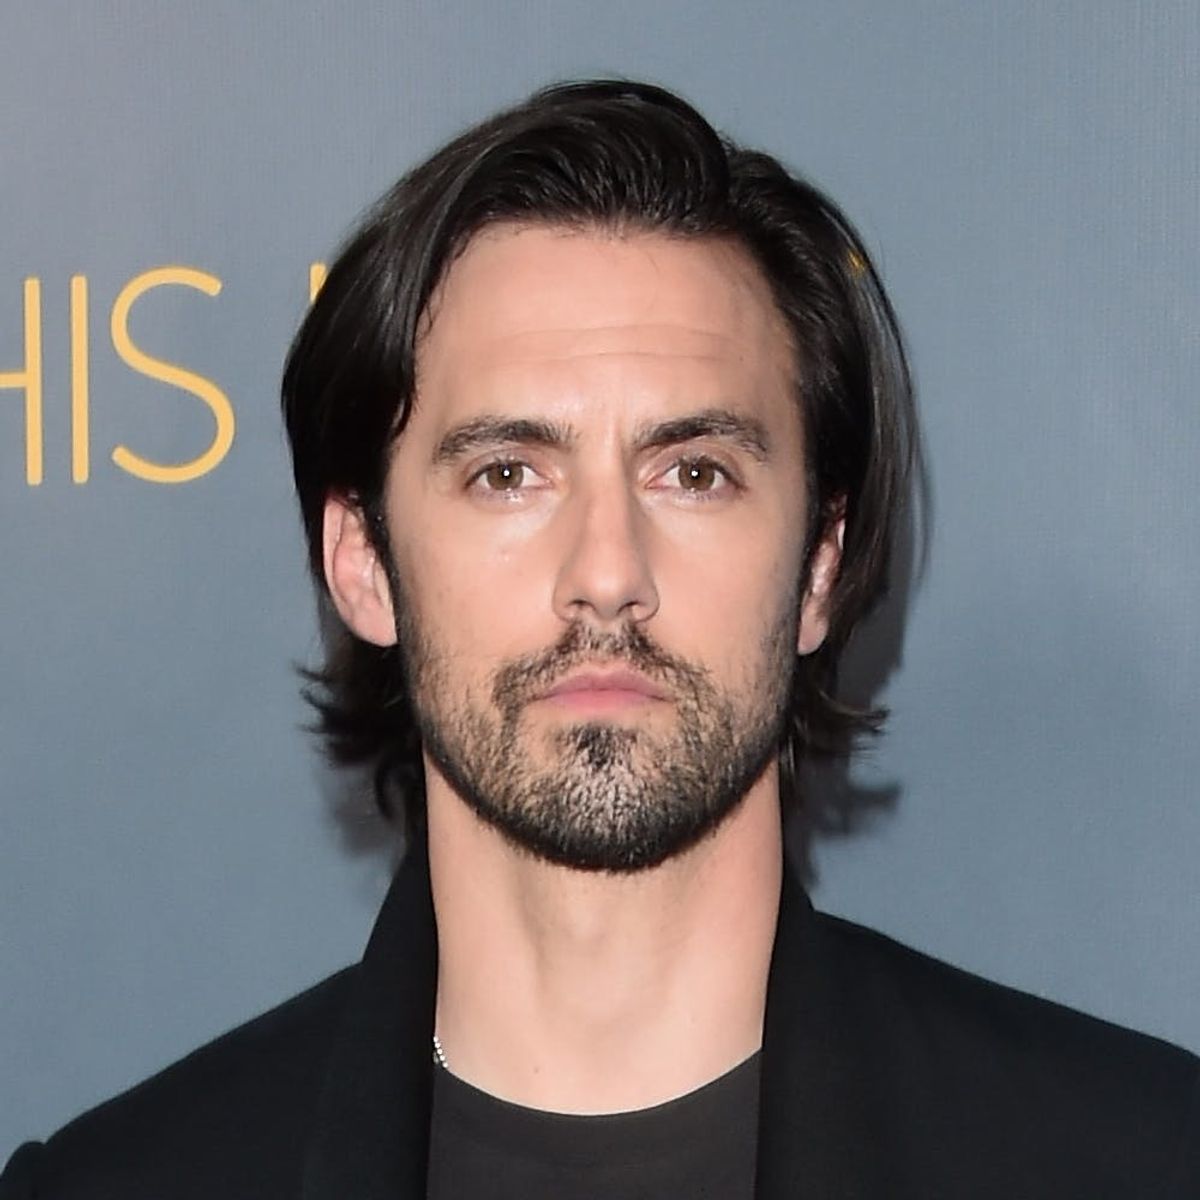 Milo Ventimiglia Just Gave Fans the WORST News About Gilmore Girls’ Jess